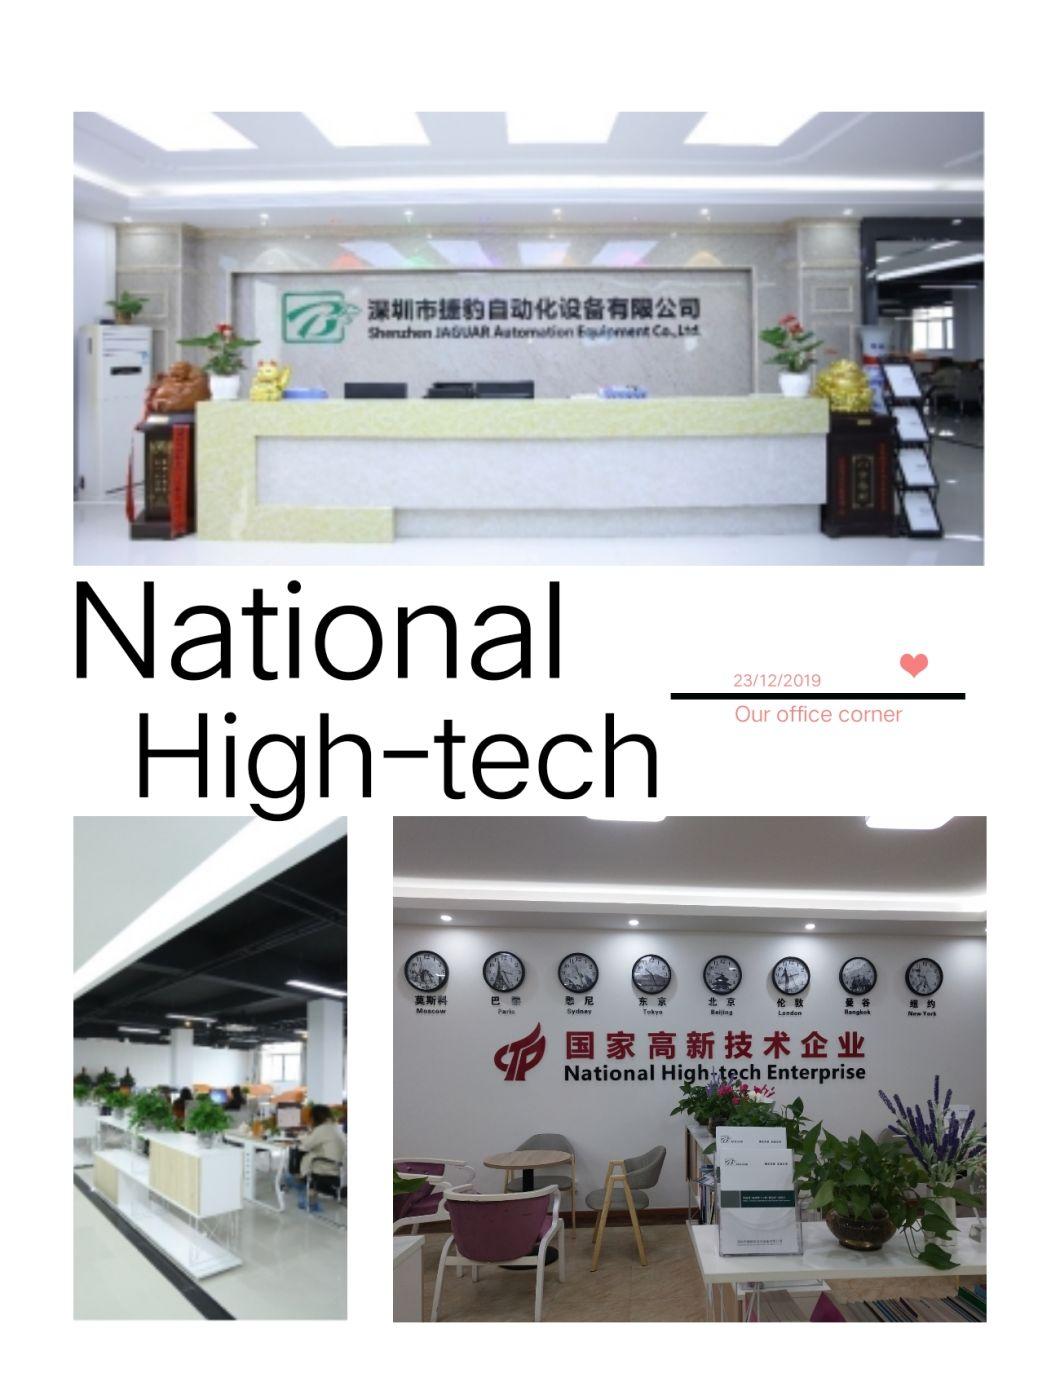 Lead Free Hot Air Reflow Oven Machine for LED Bulb, Tube, Strip SMT Production Line